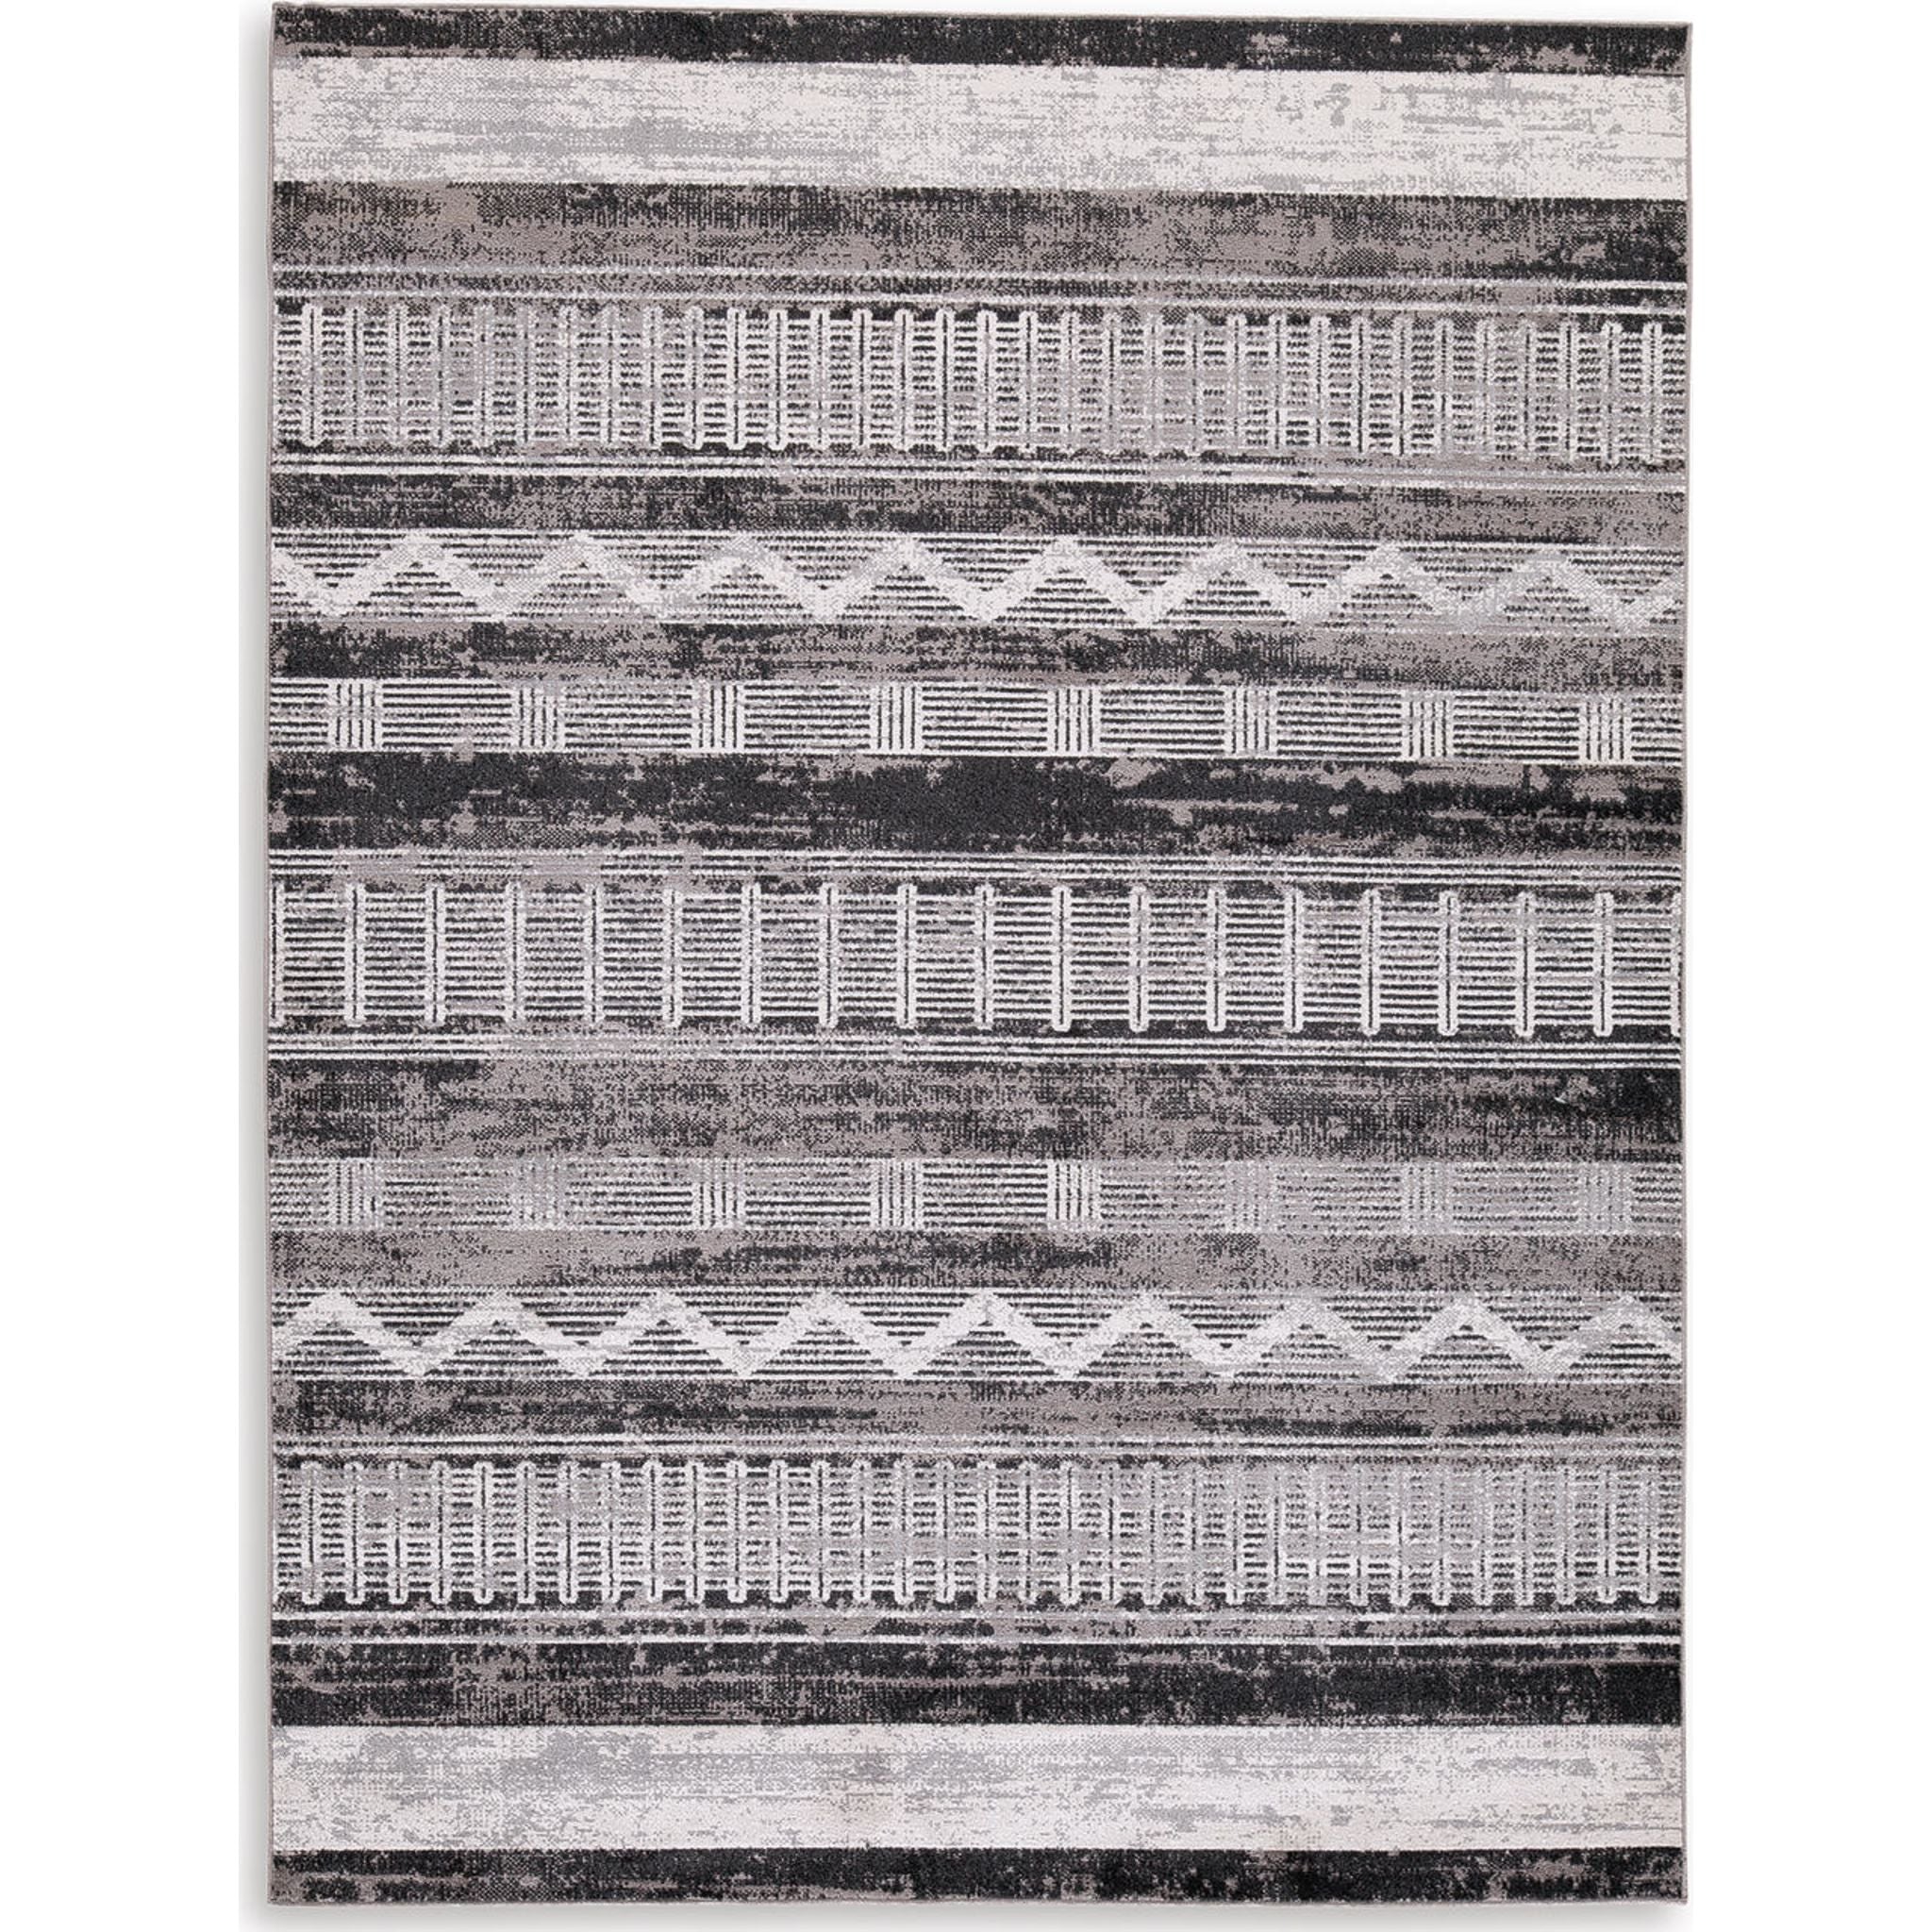 Henchester Area Rug - 5'x7'